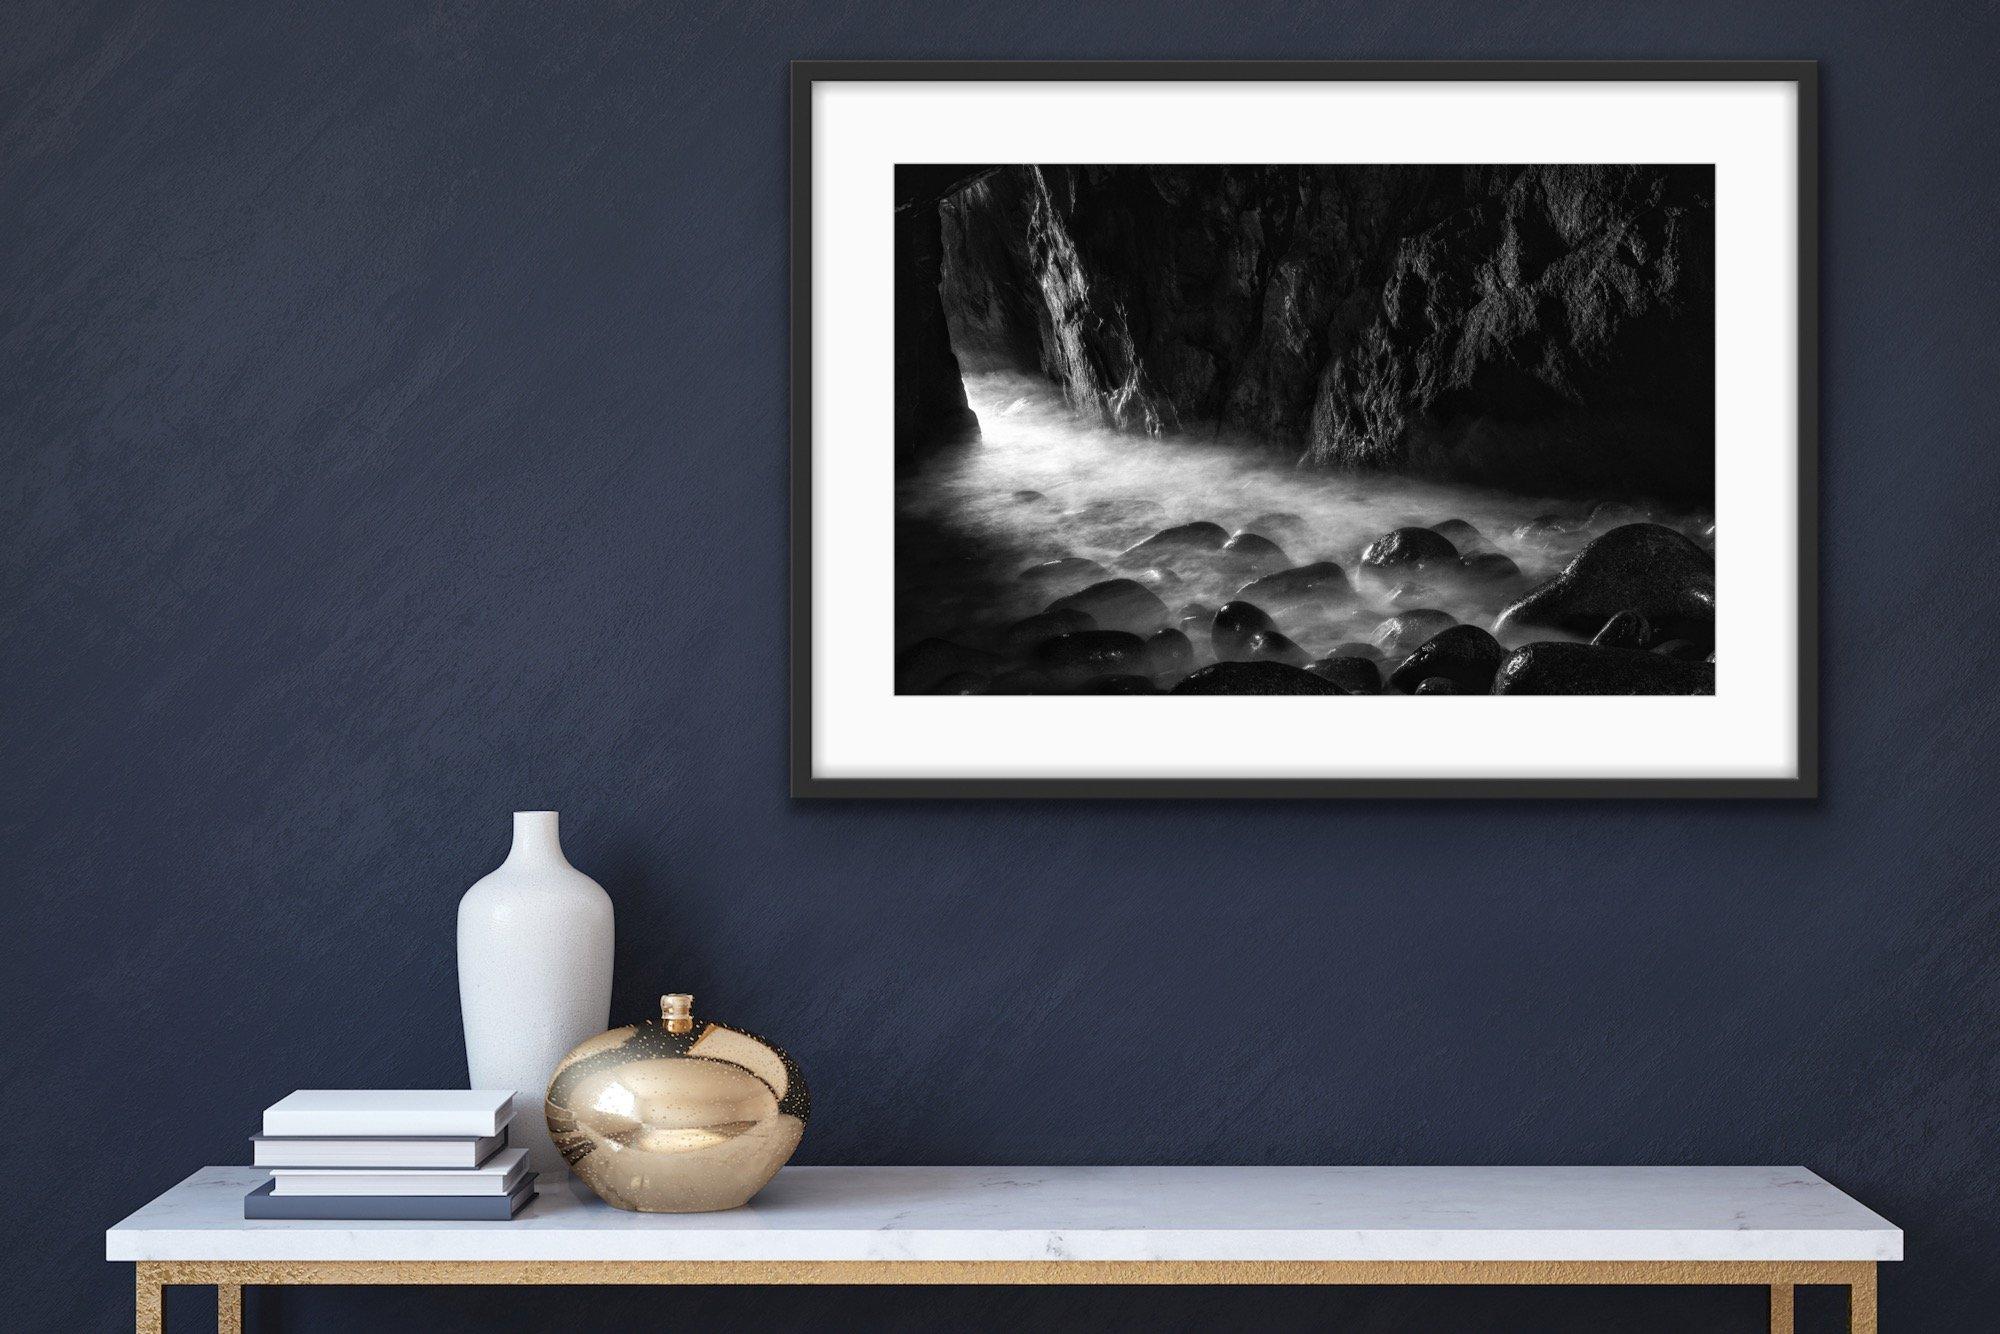 Aodh is a god of the underworld and prince of the Daoine Sidhe in Irish mythology.  The crashing waves in this cave  made its legend as a gateway to the realm of the Gods entirely  understandable…

James Sparshatt’s black and white landscapes have